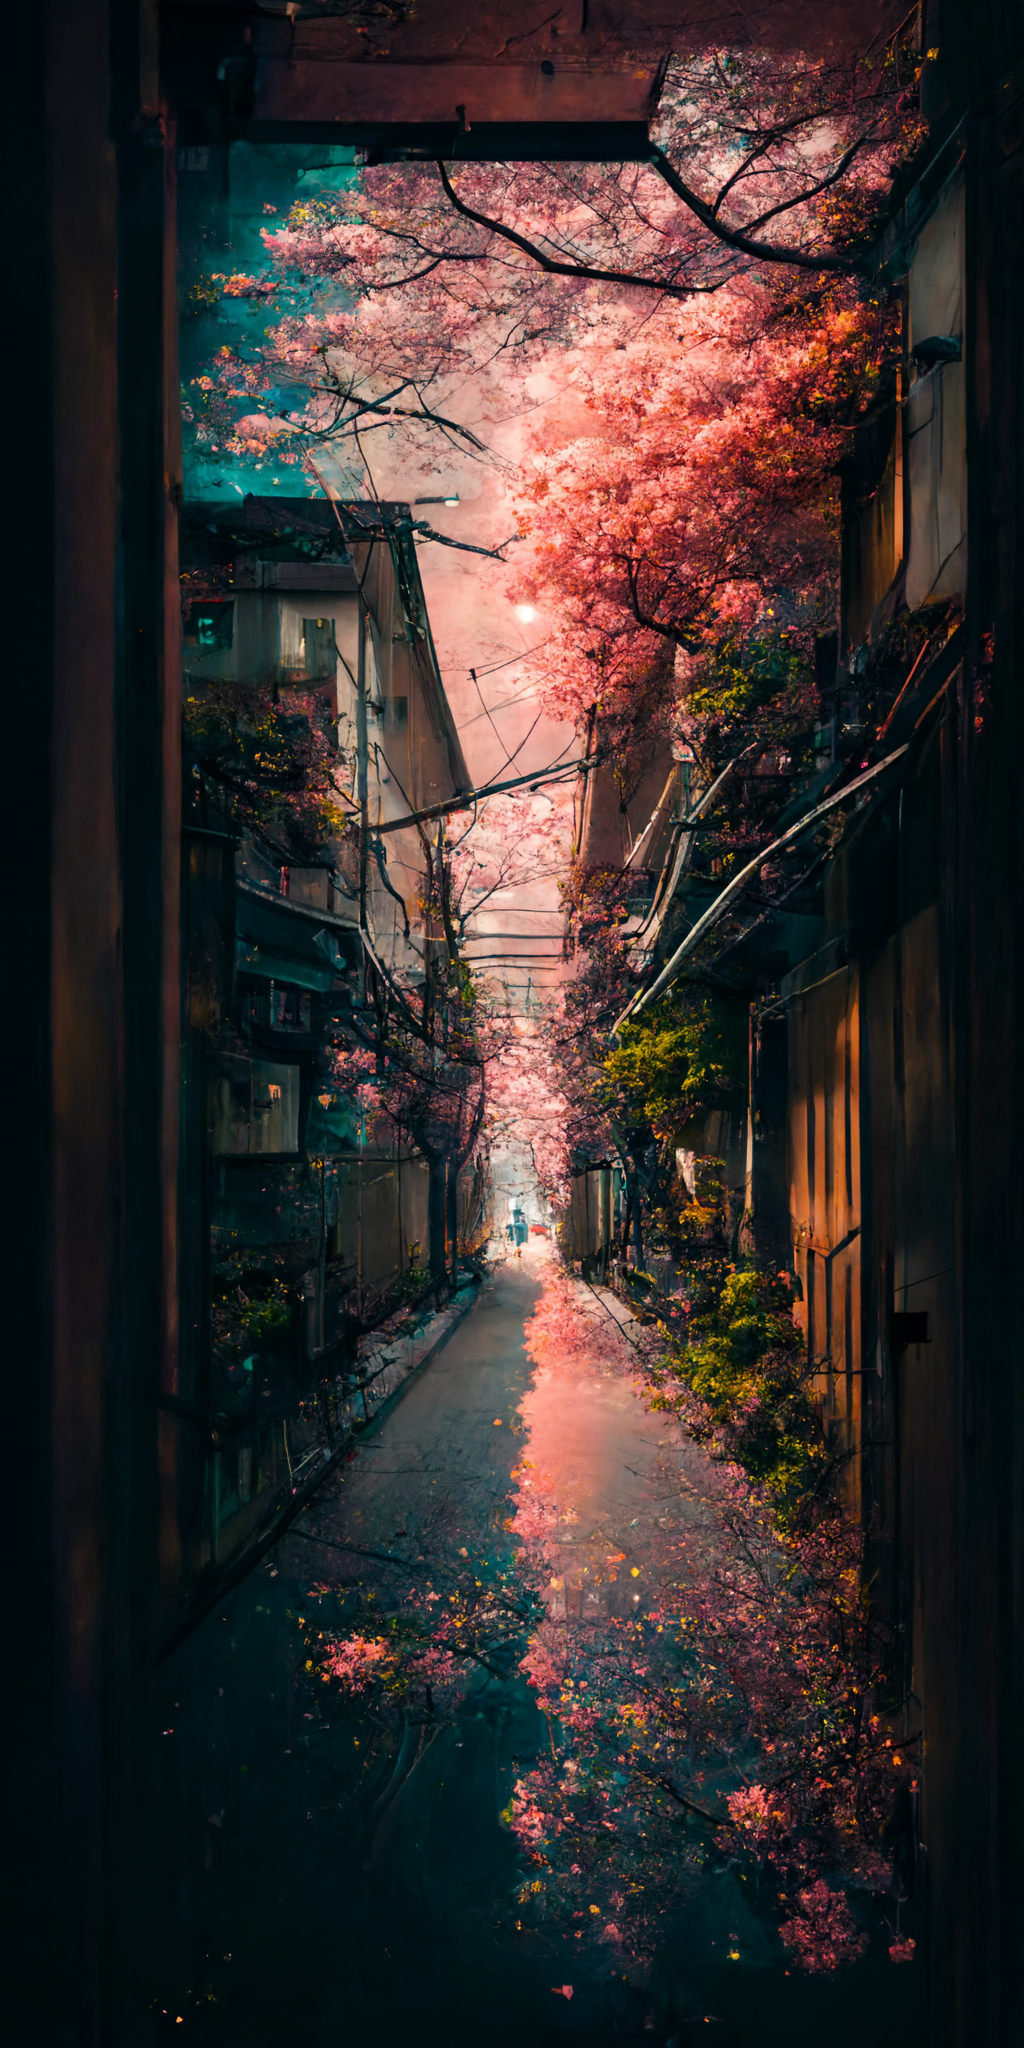 Bluewing_an_alley_in_Tokyo_with_cherry_blossoms_Sony_a7_III_Top_7c6a56b1-d898-4dbf-890d-7b0c171f5dbd.jpeg